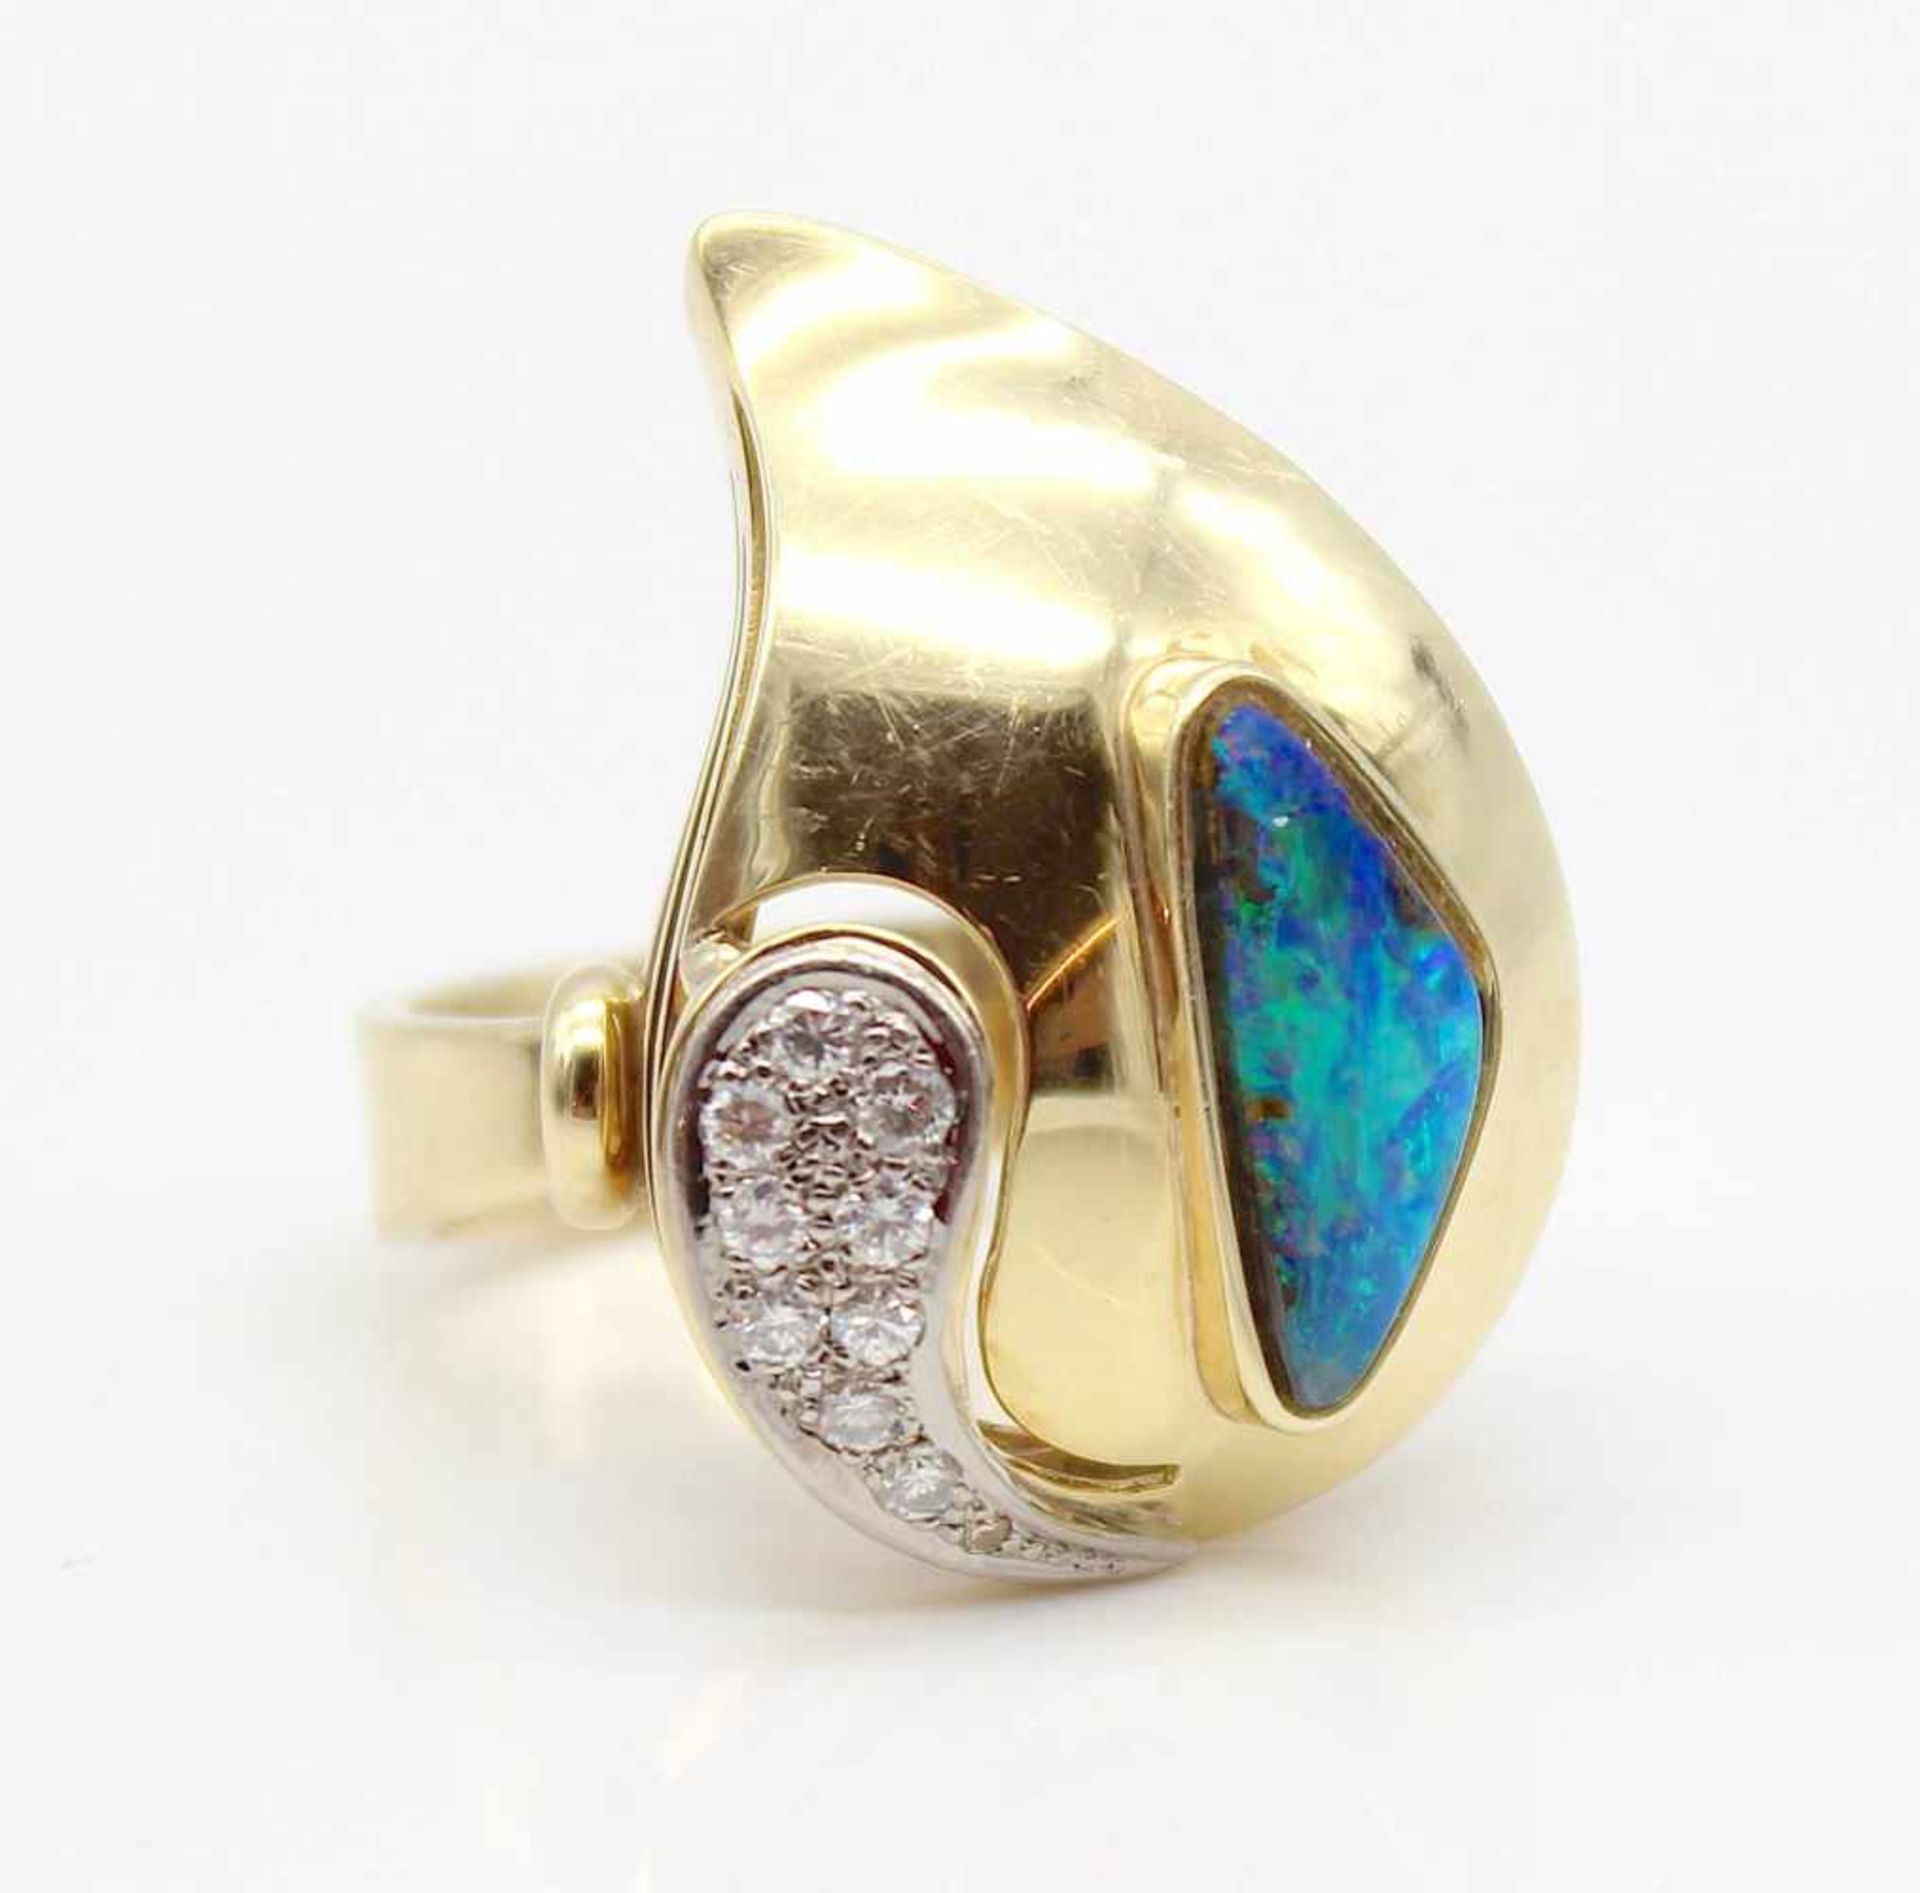 Ring made of 585 gold with 1 boulder opal and 10 brilliants, total ca. 0,25 ct,medium degree of - Bild 2 aus 4